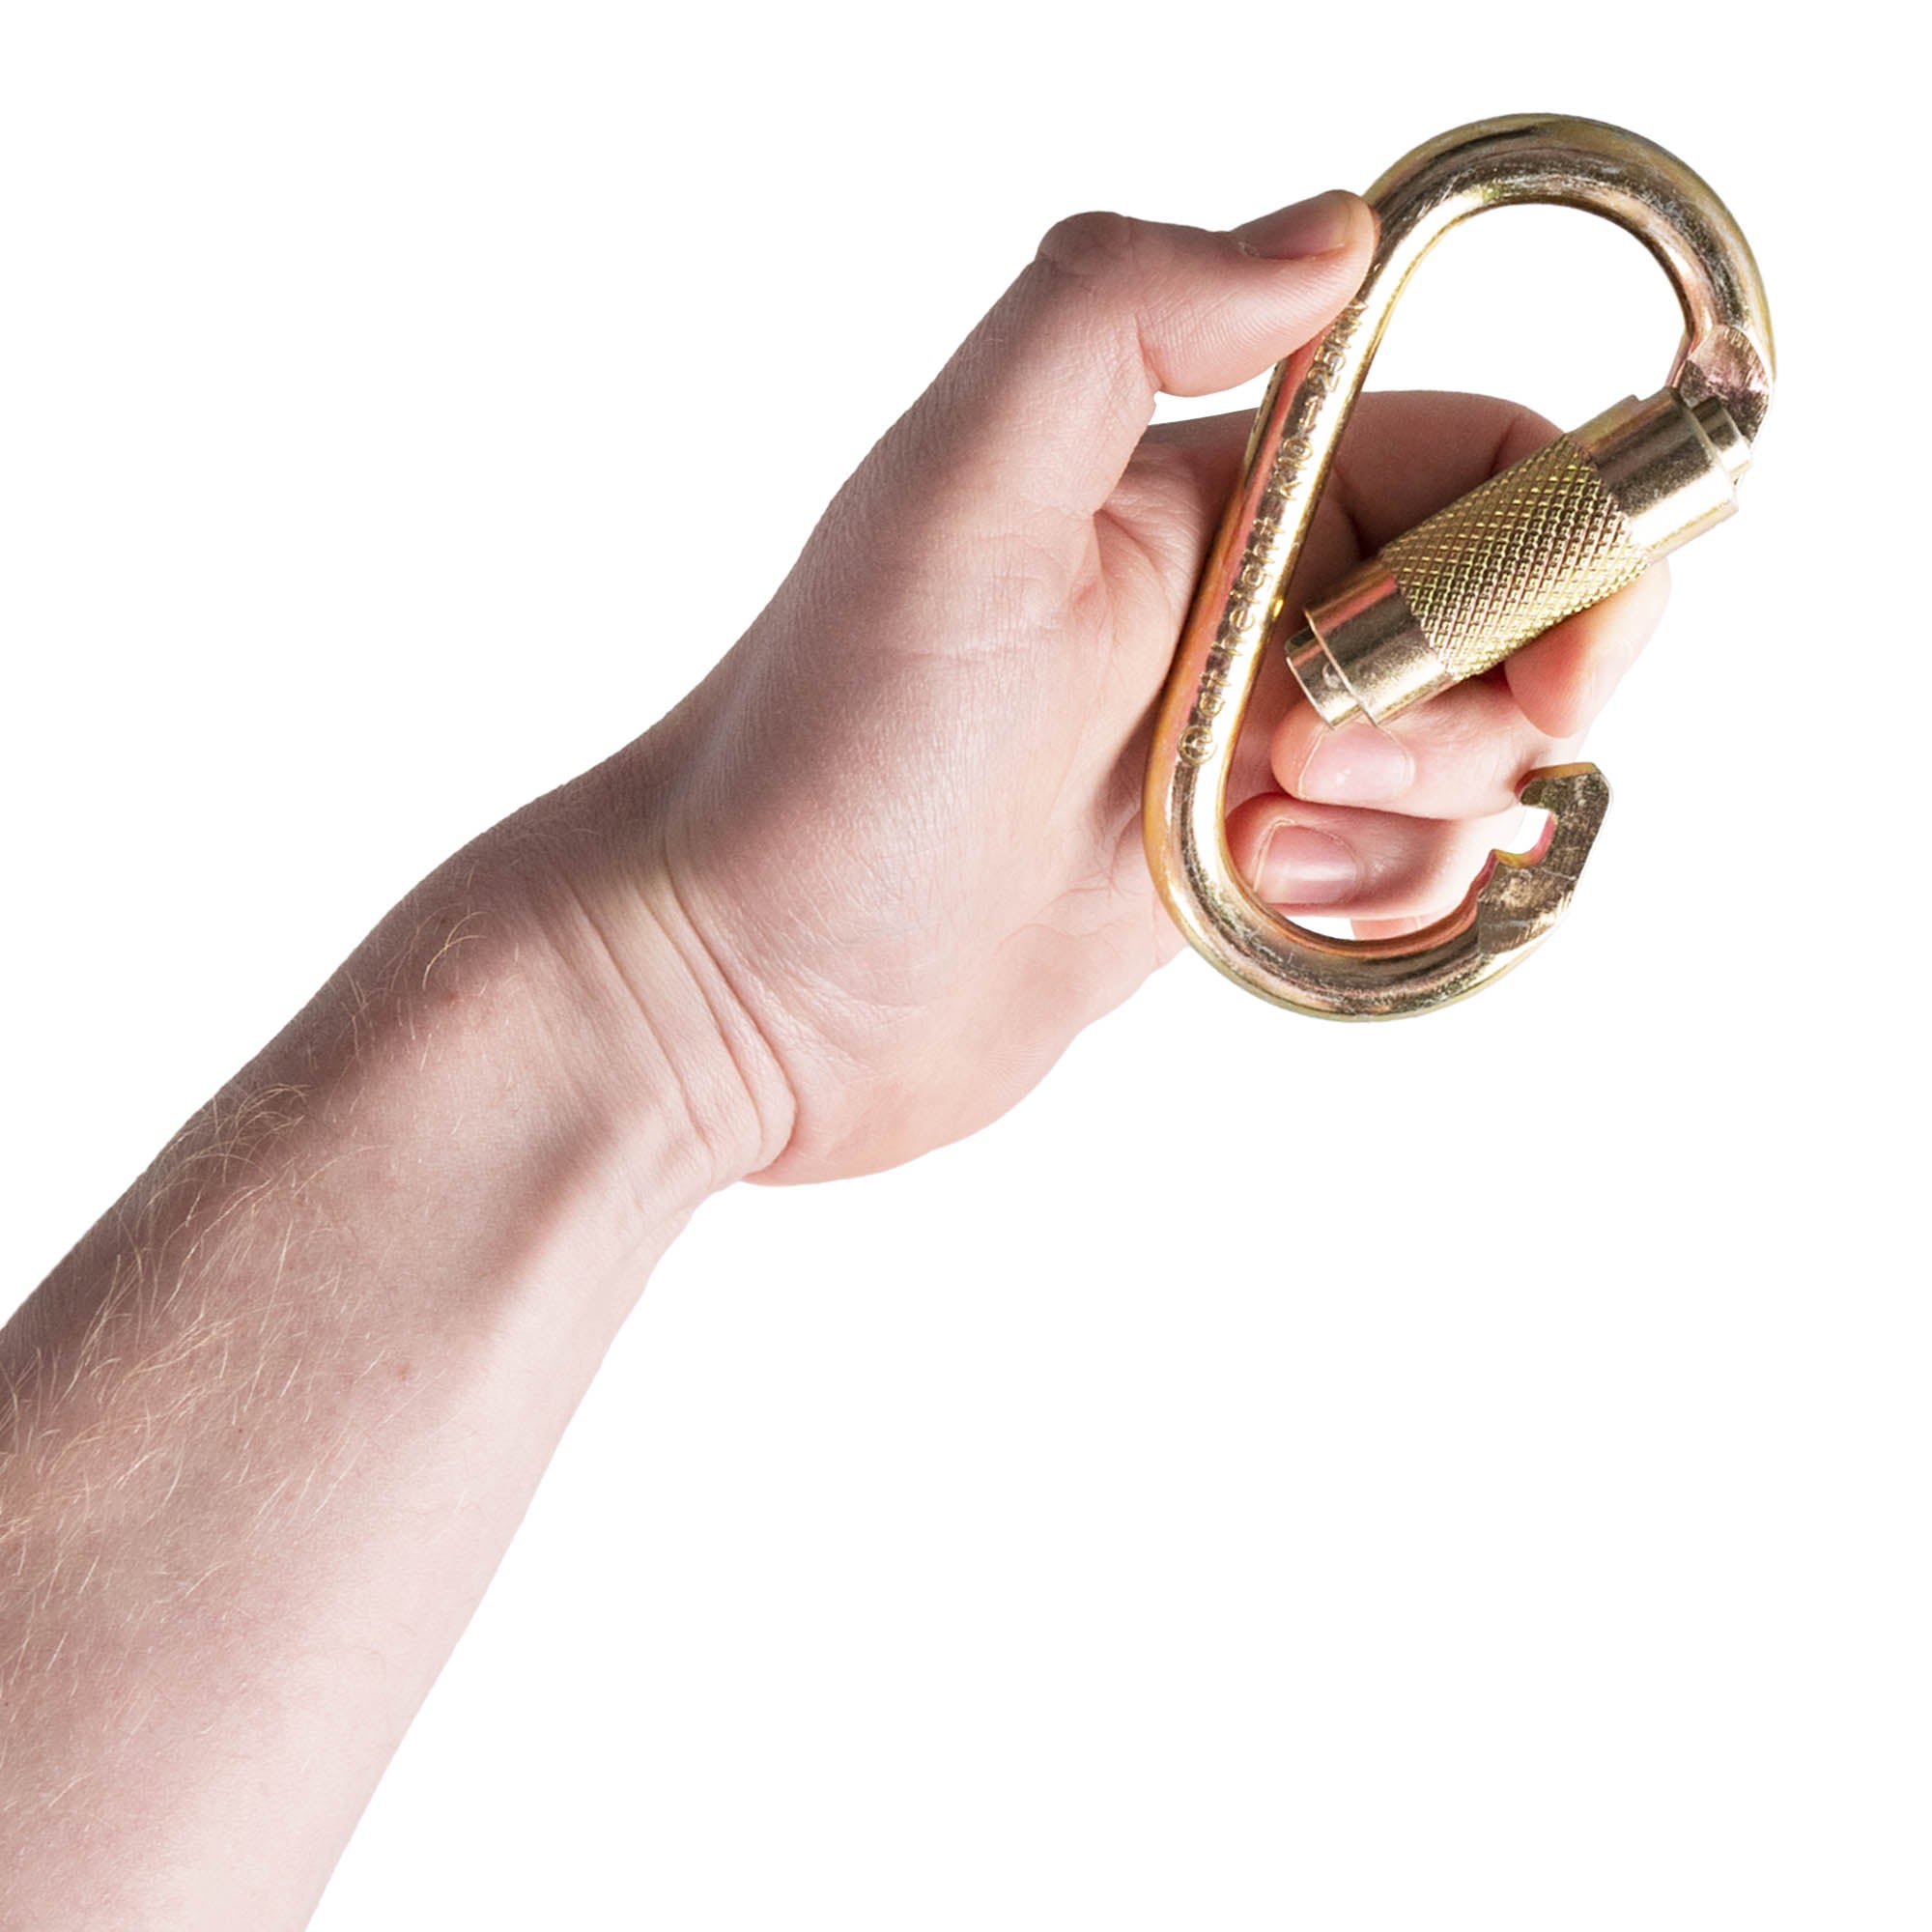 Prodigy double action carabiner in hand